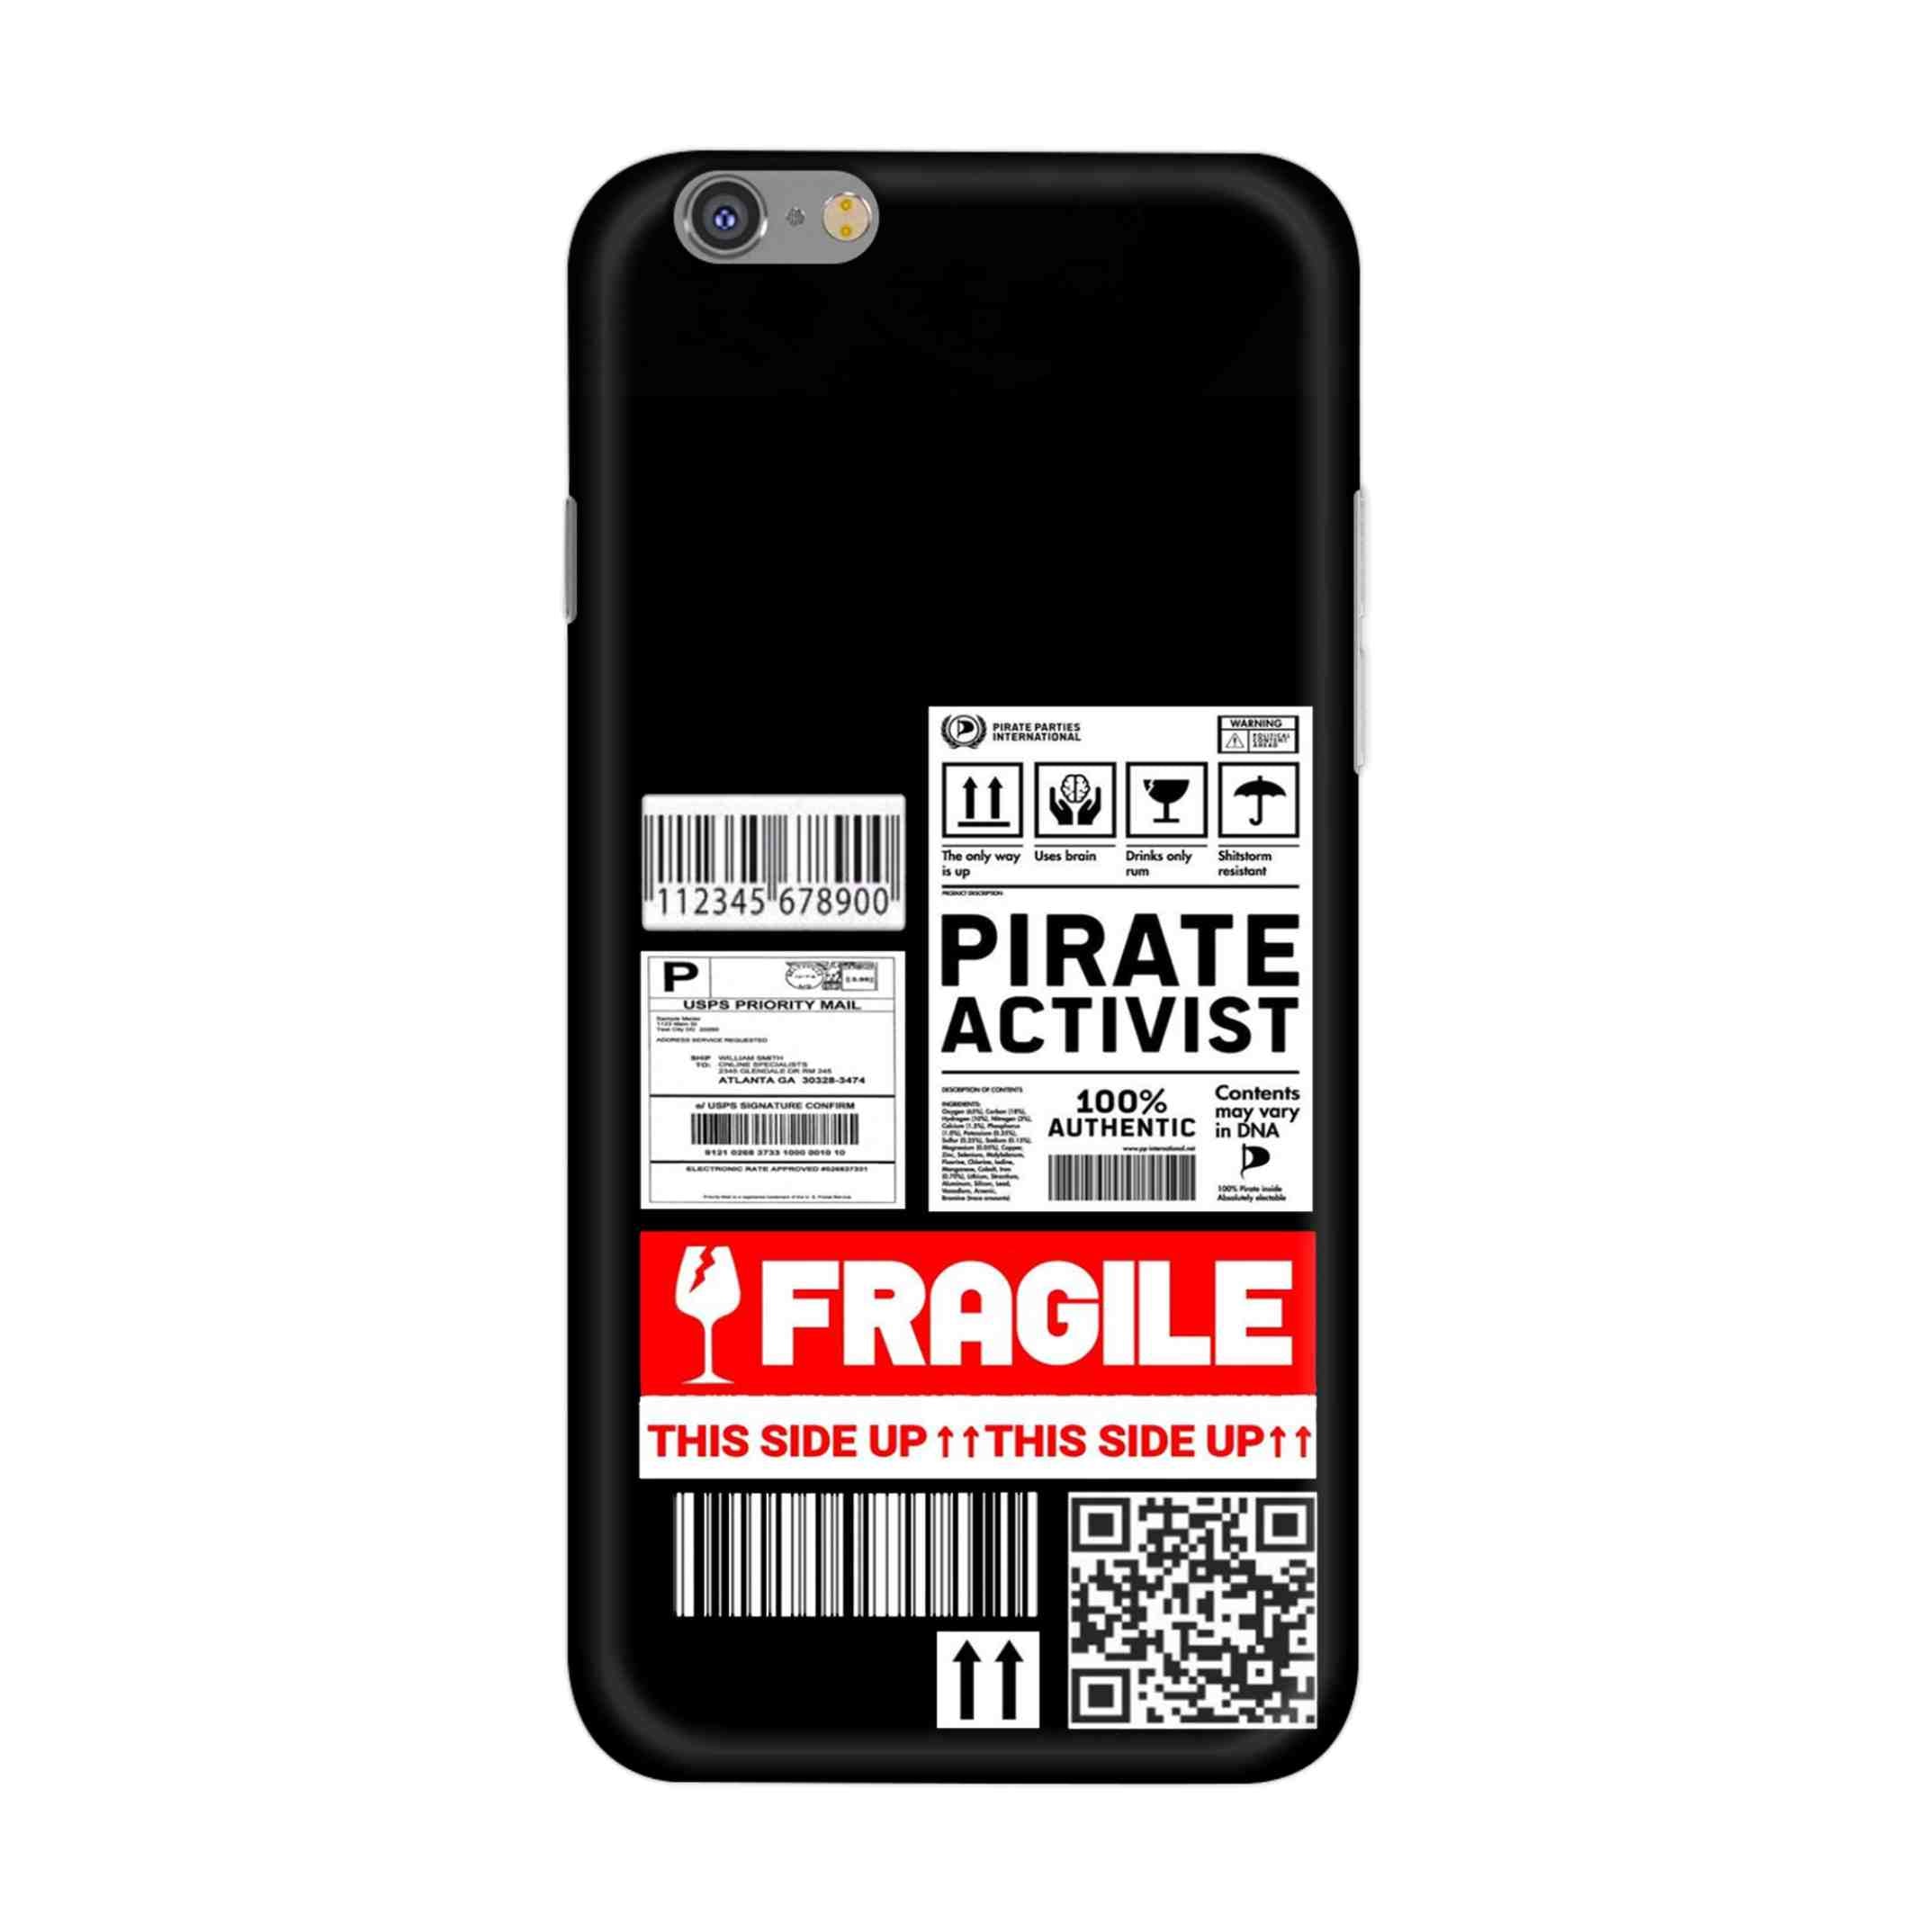 Buy Fragile Hard Back Mobile Phone Case/Cover For iPhone 6 Plus / 6s Plus Online